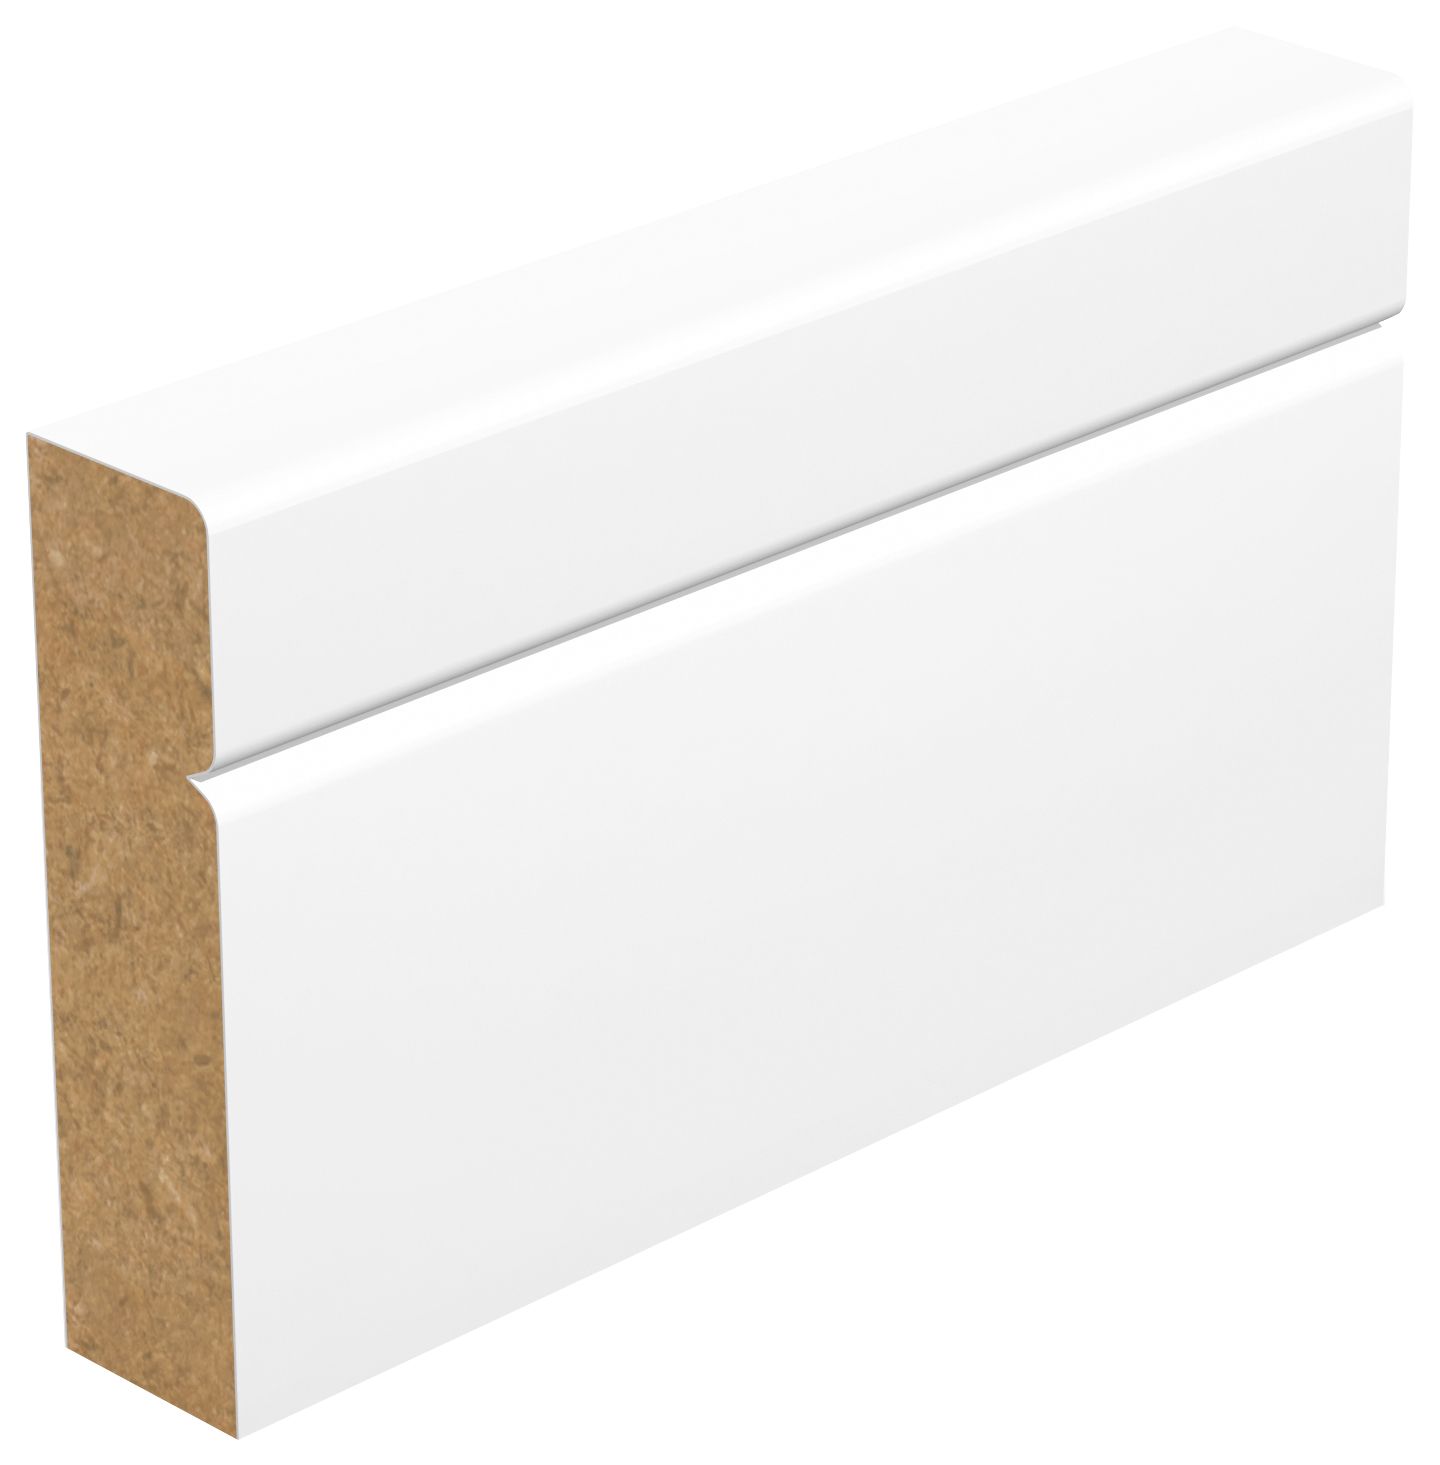 Wickes Contemporary V-Groove MDF Architrave - 18 x 69 x 2100mm - Pack of 5